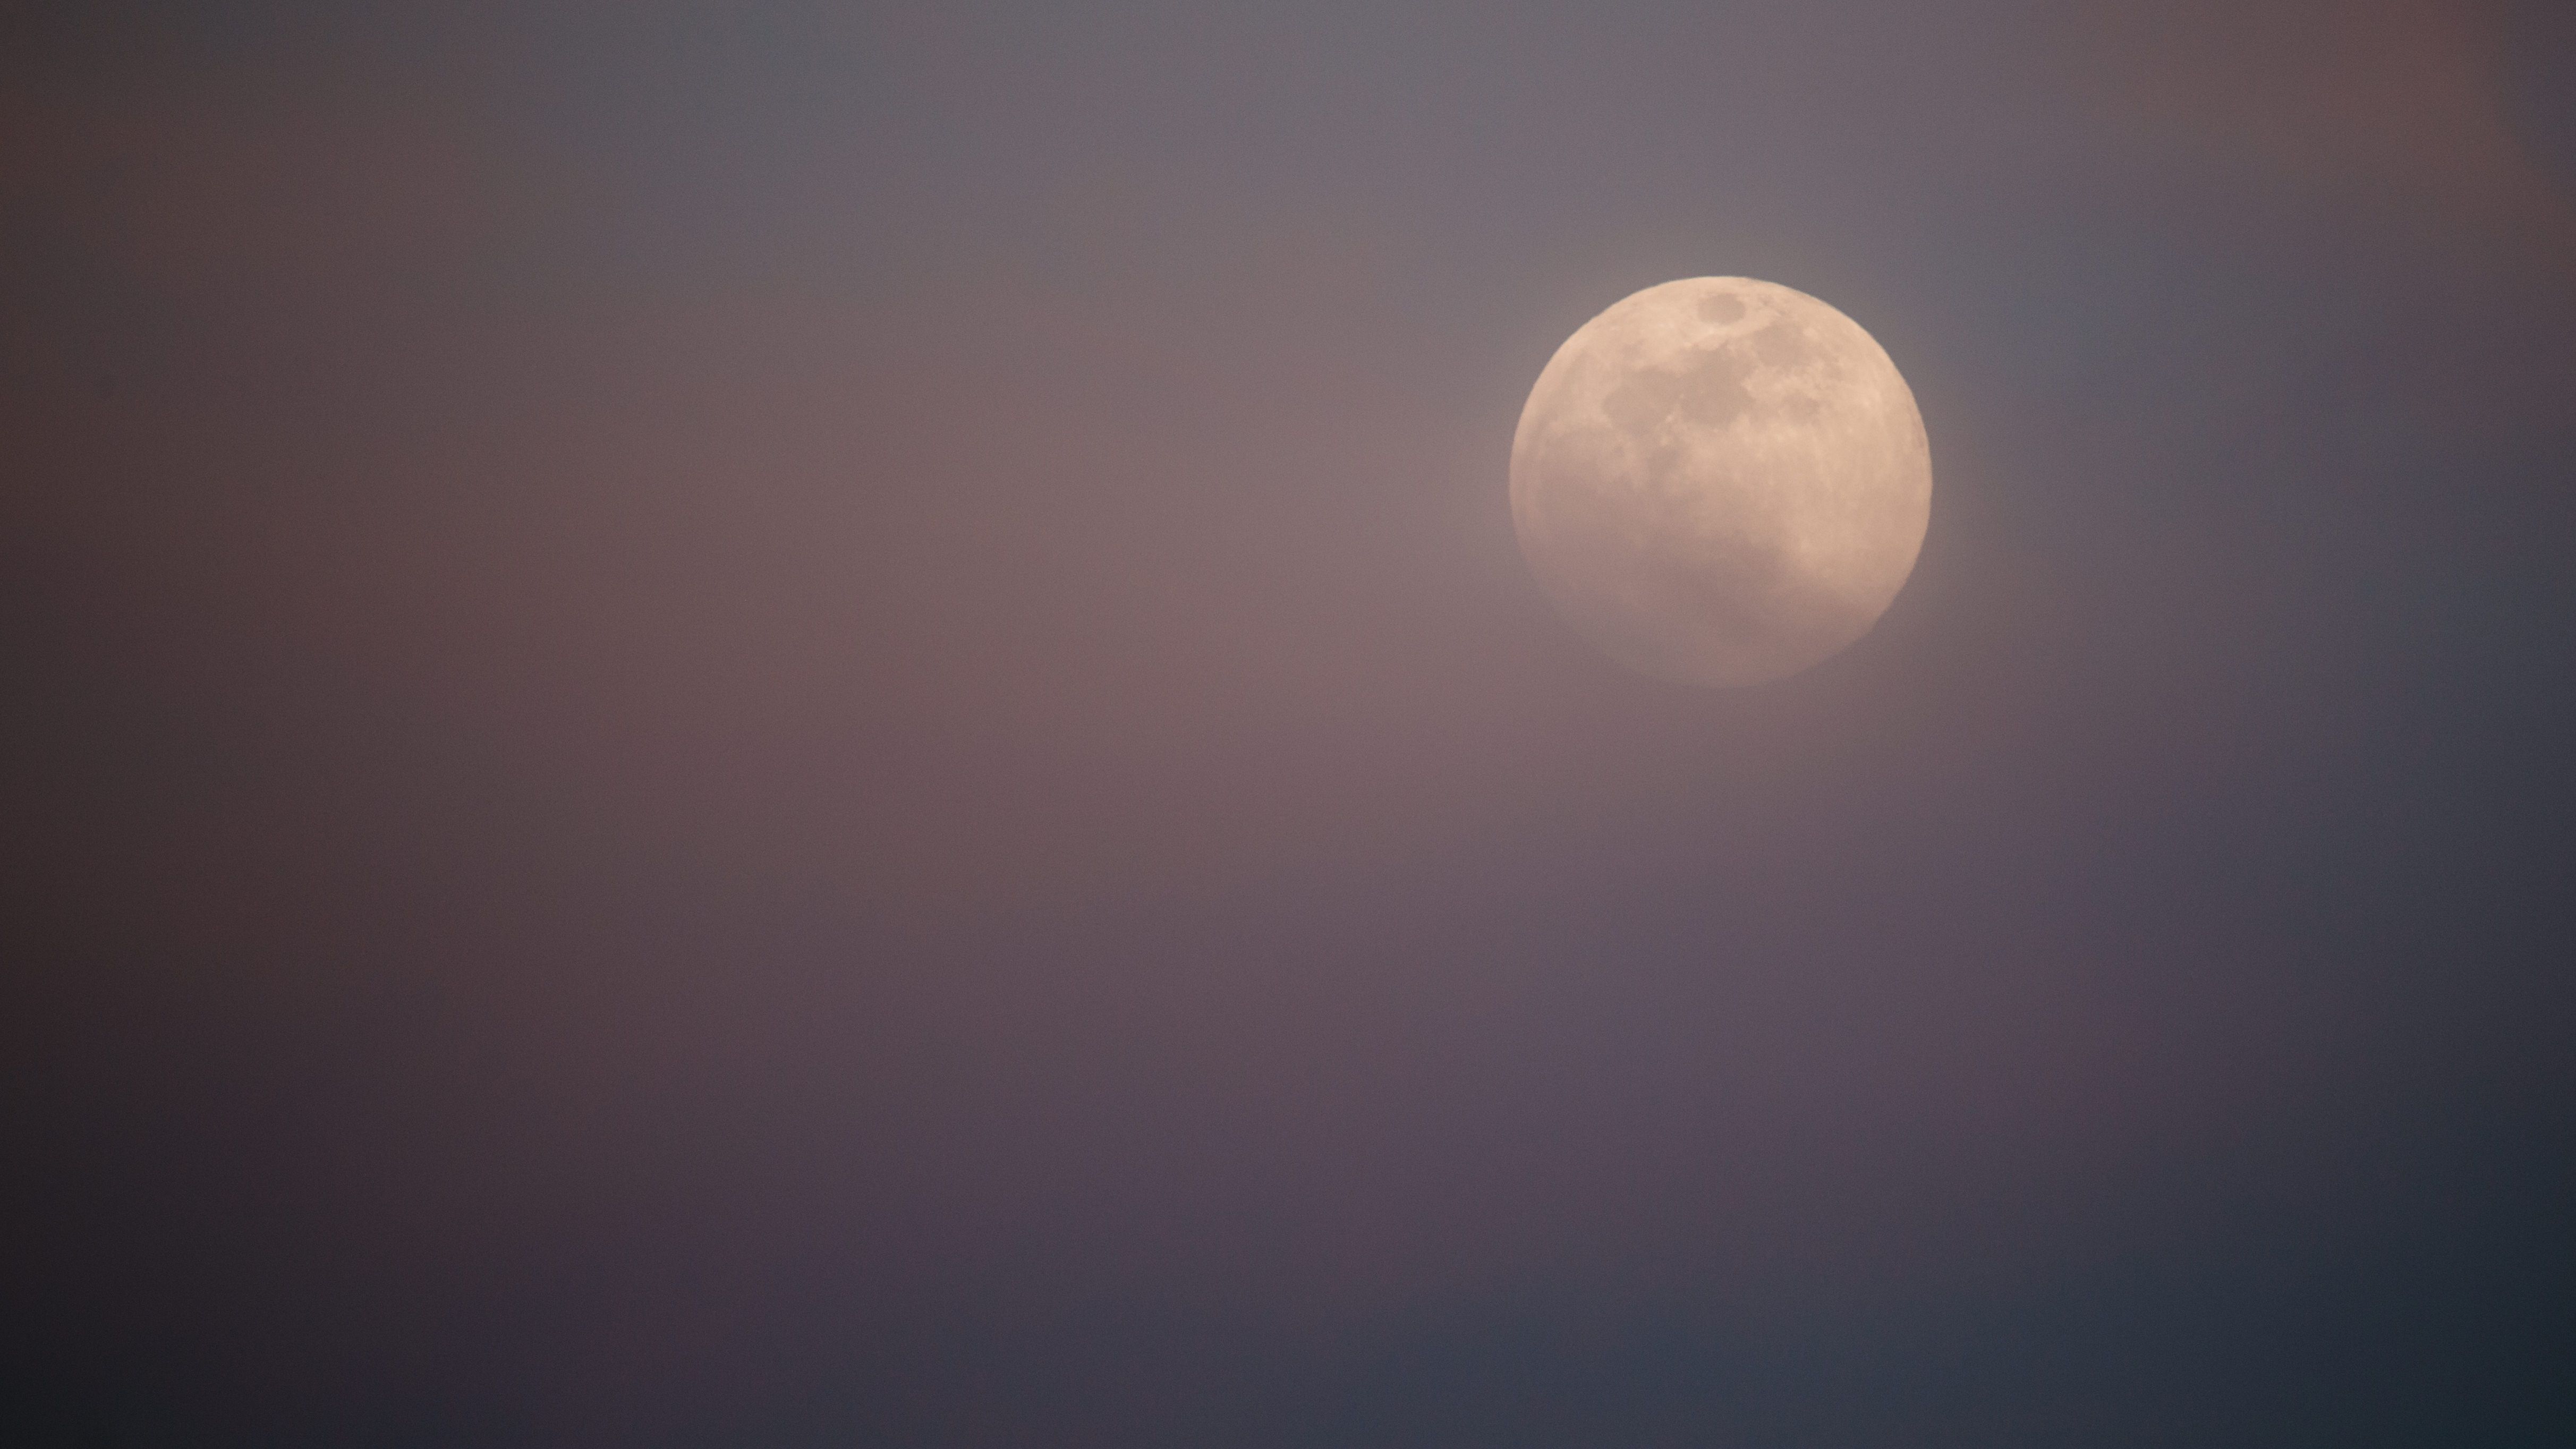 4849x2728 #cloud, #moonlight, #Creative Commons image, #pinkmoon, # spring color, #moon, #sky, #canon, #spring, #night, #atmosphere, #full moon, #perfect timing HD Wallpaper